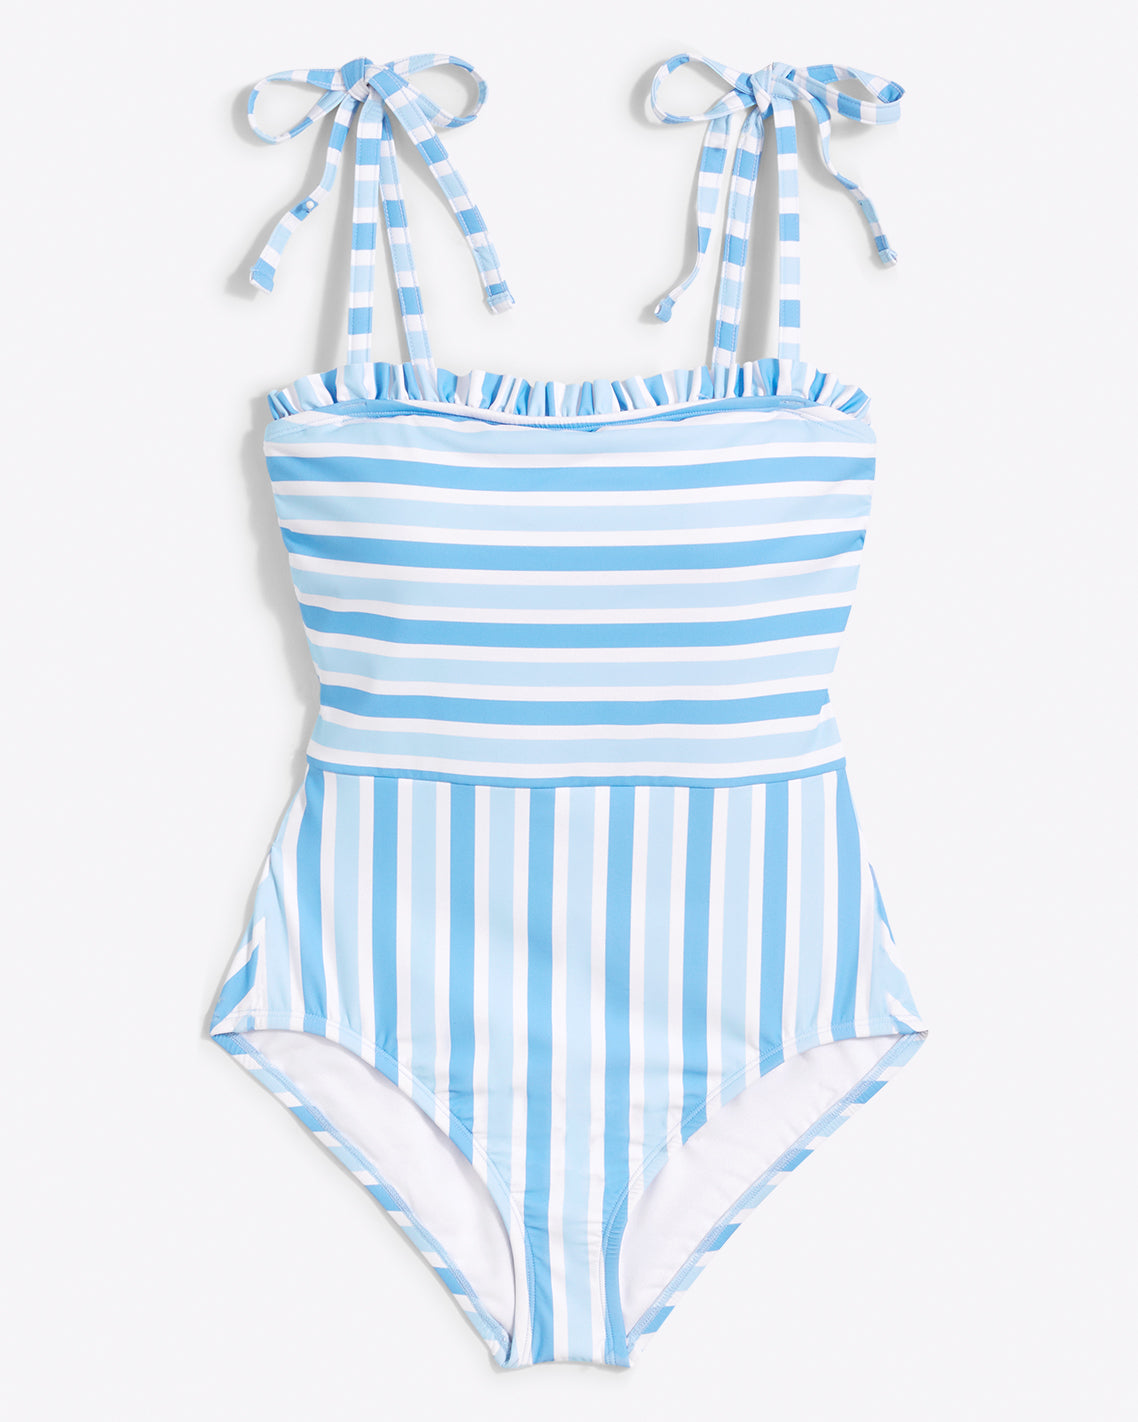 Ruffled One Piece Swimsuit in Awning Stripe